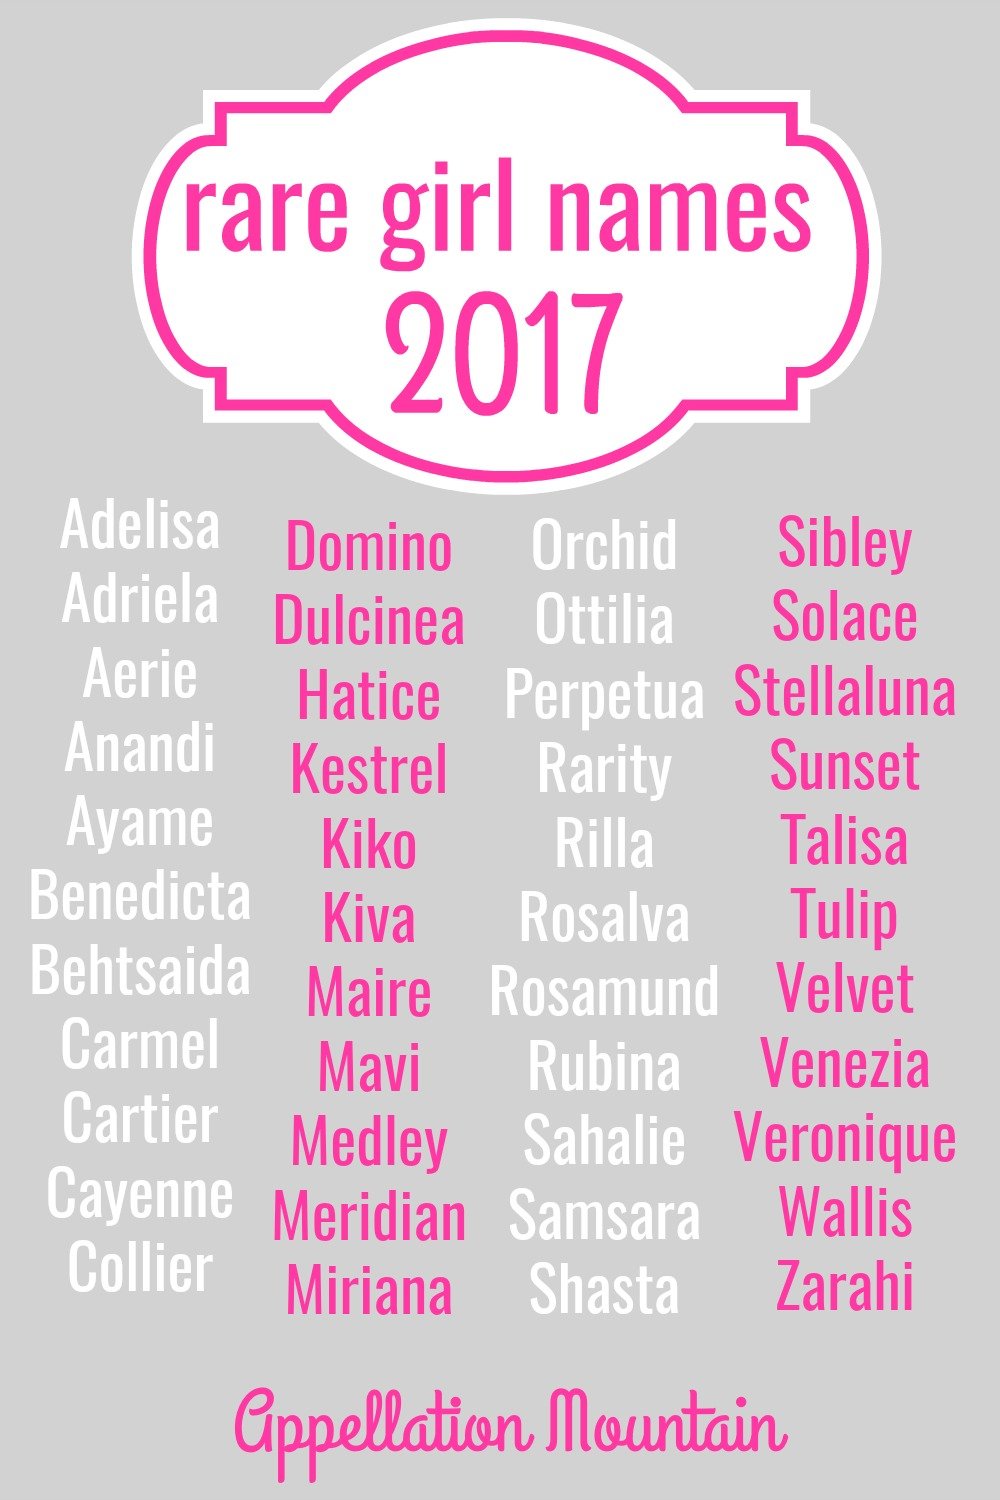 Rare Girl Names 2017: The Great Eights - Appellation Mountain